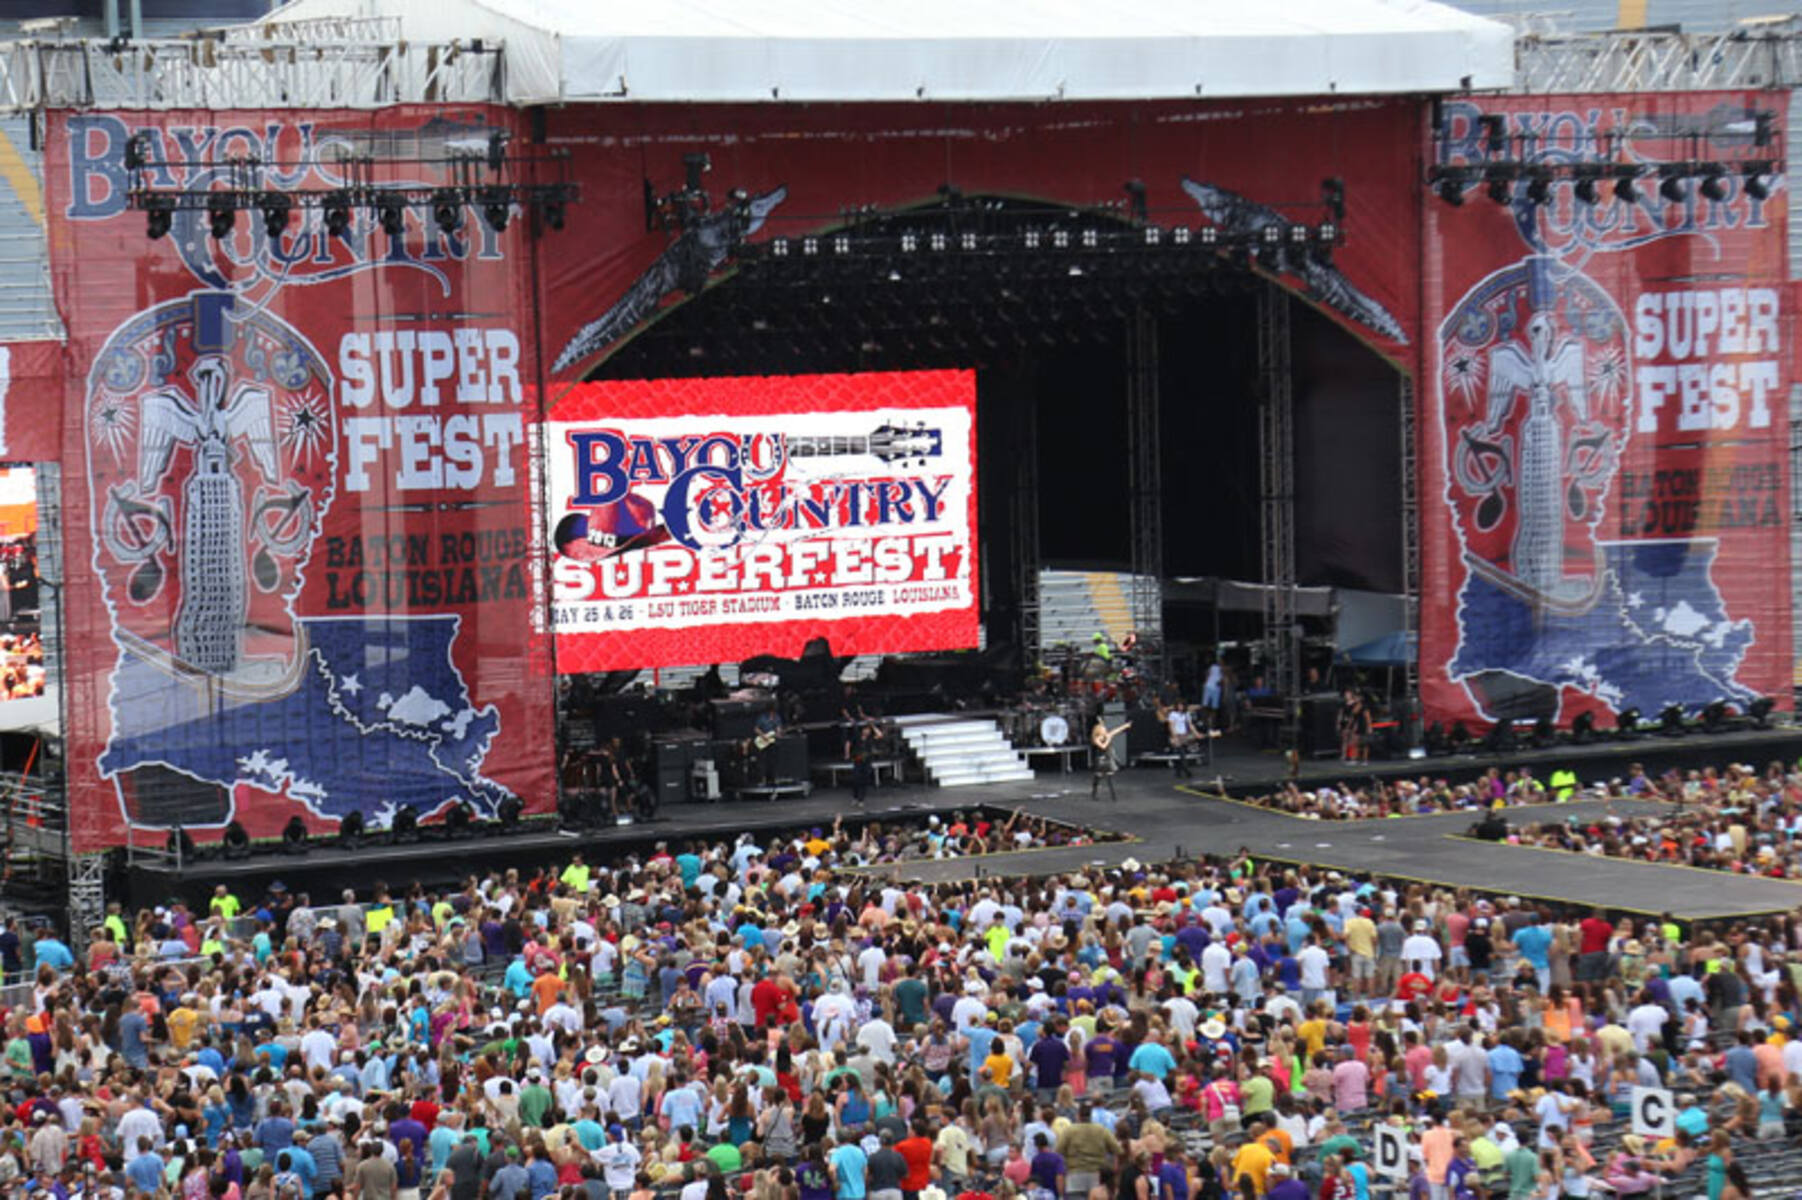 11-facts-about-bayou-country-superfest